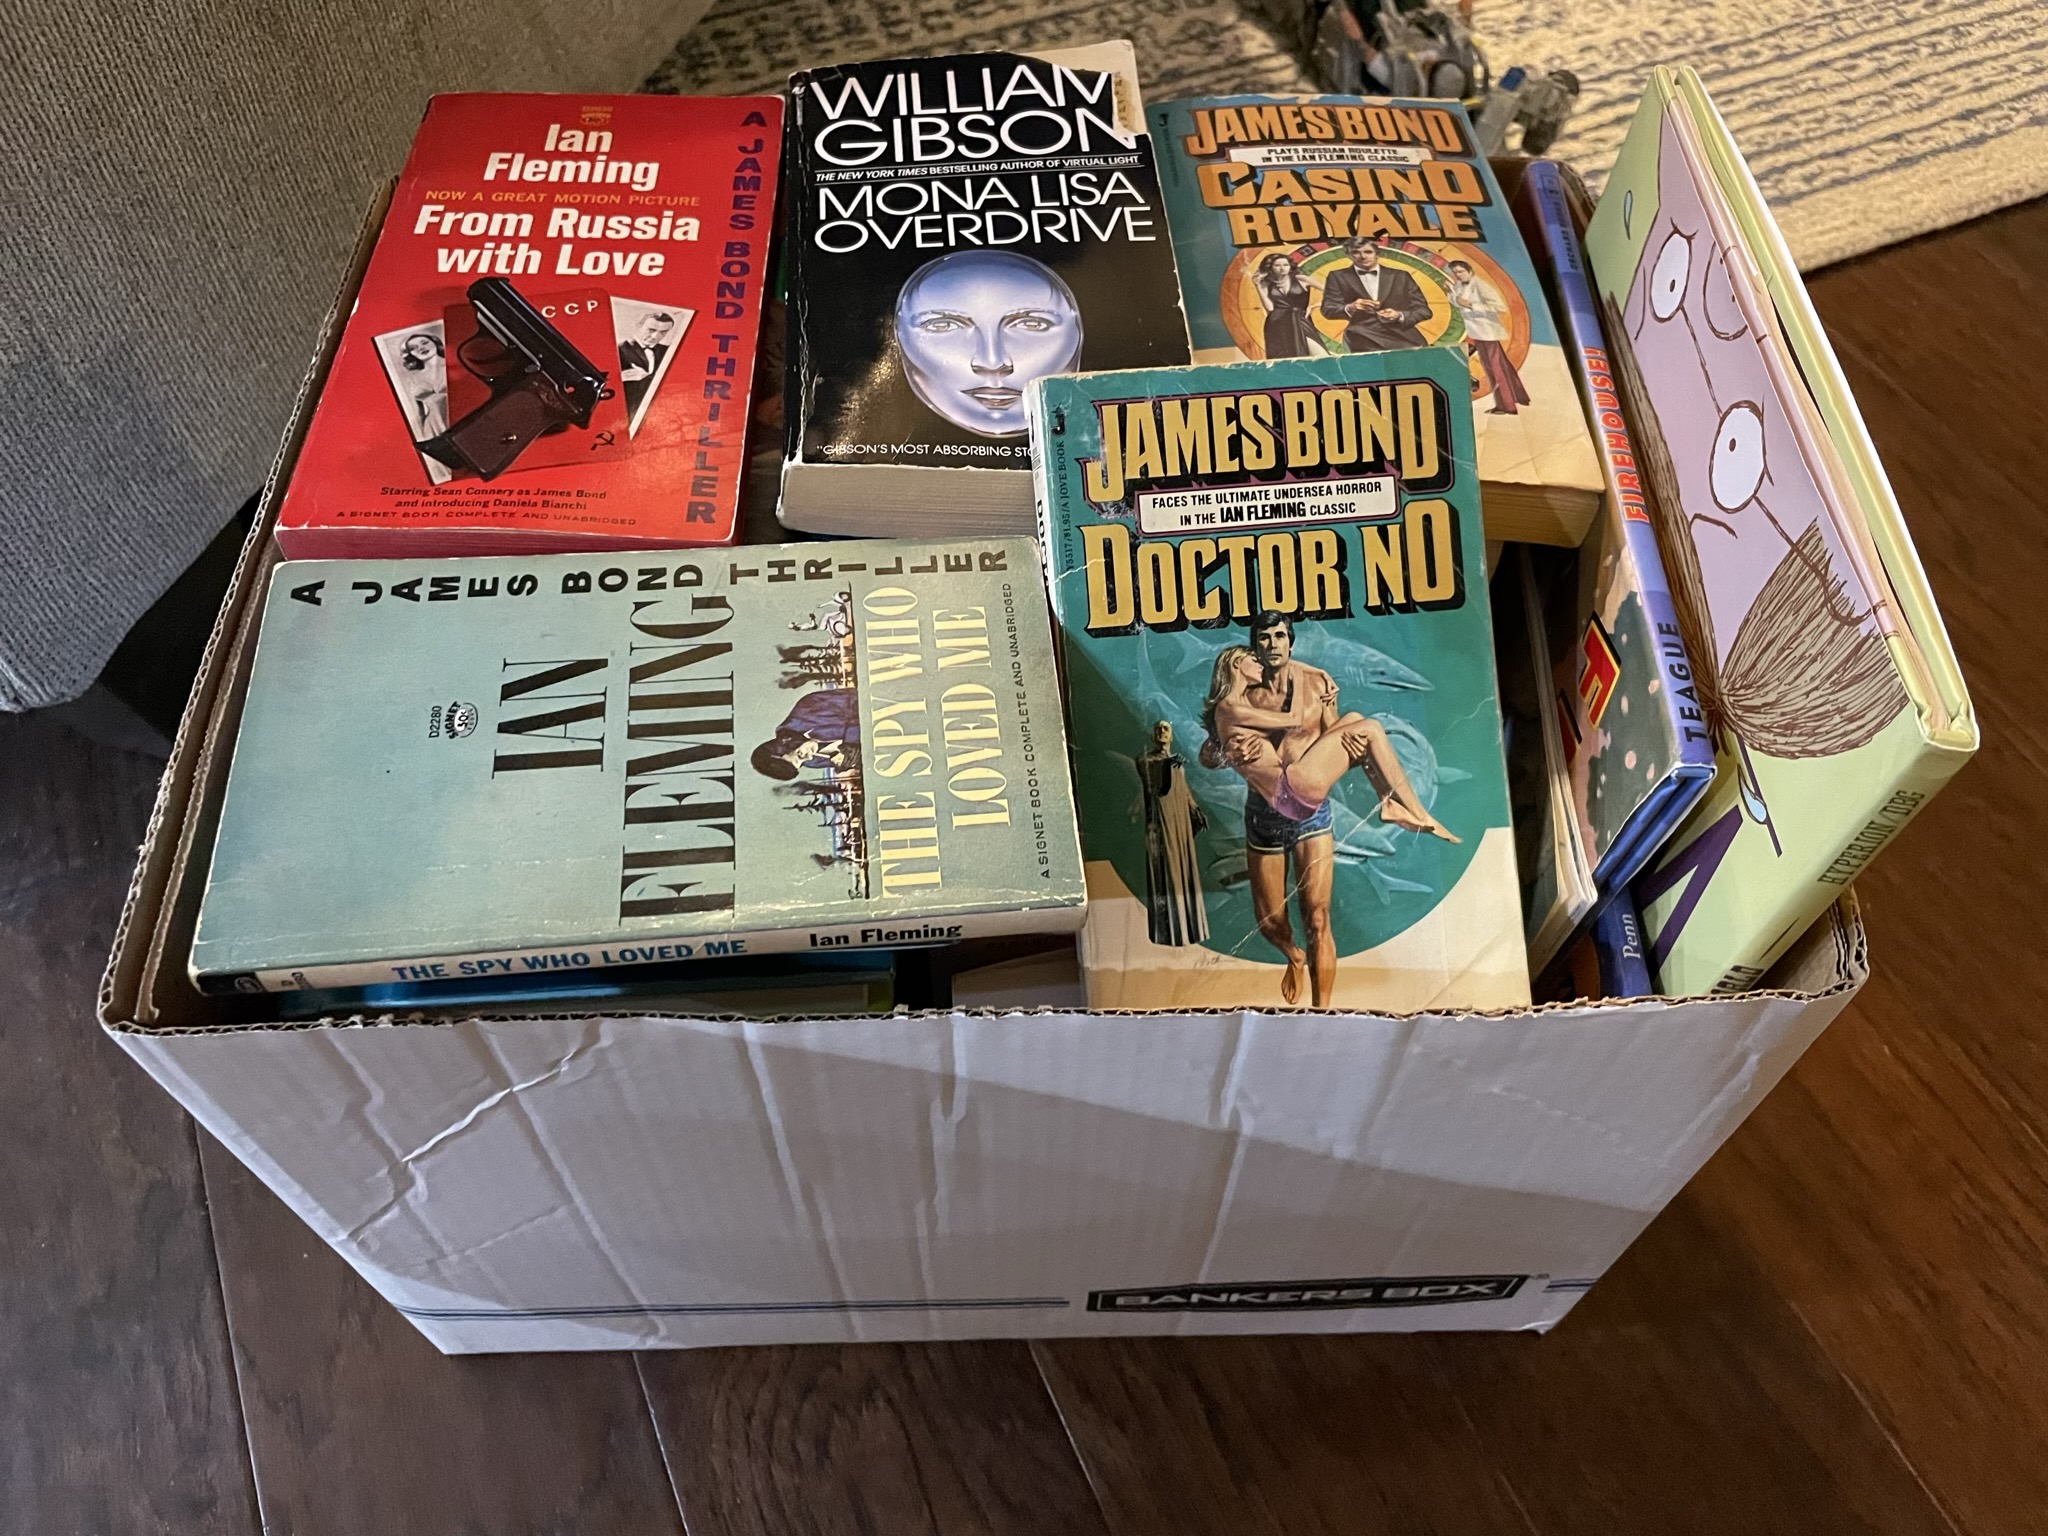 A photo of a large box of books, with the covers of From Russia with Love, The Spy Who Loved Me, Doctor No, and Casino Royale, all by Ian Fleming, and Mona Lisa Overdrive by William Gibson.